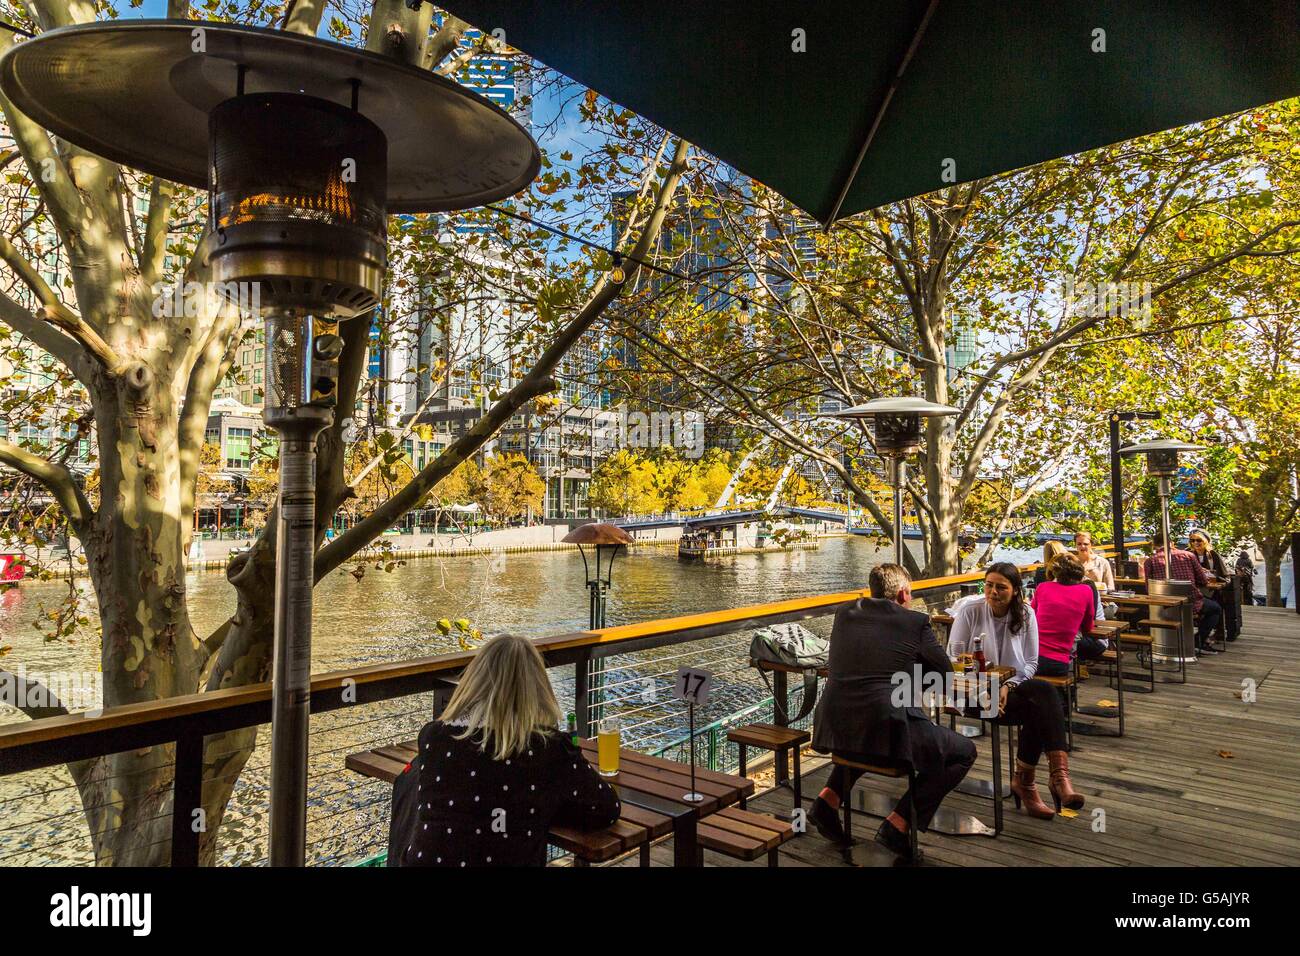 Views of boats, restaurants and shops along the Yarra River in Melbourne, Australia Stock Photo